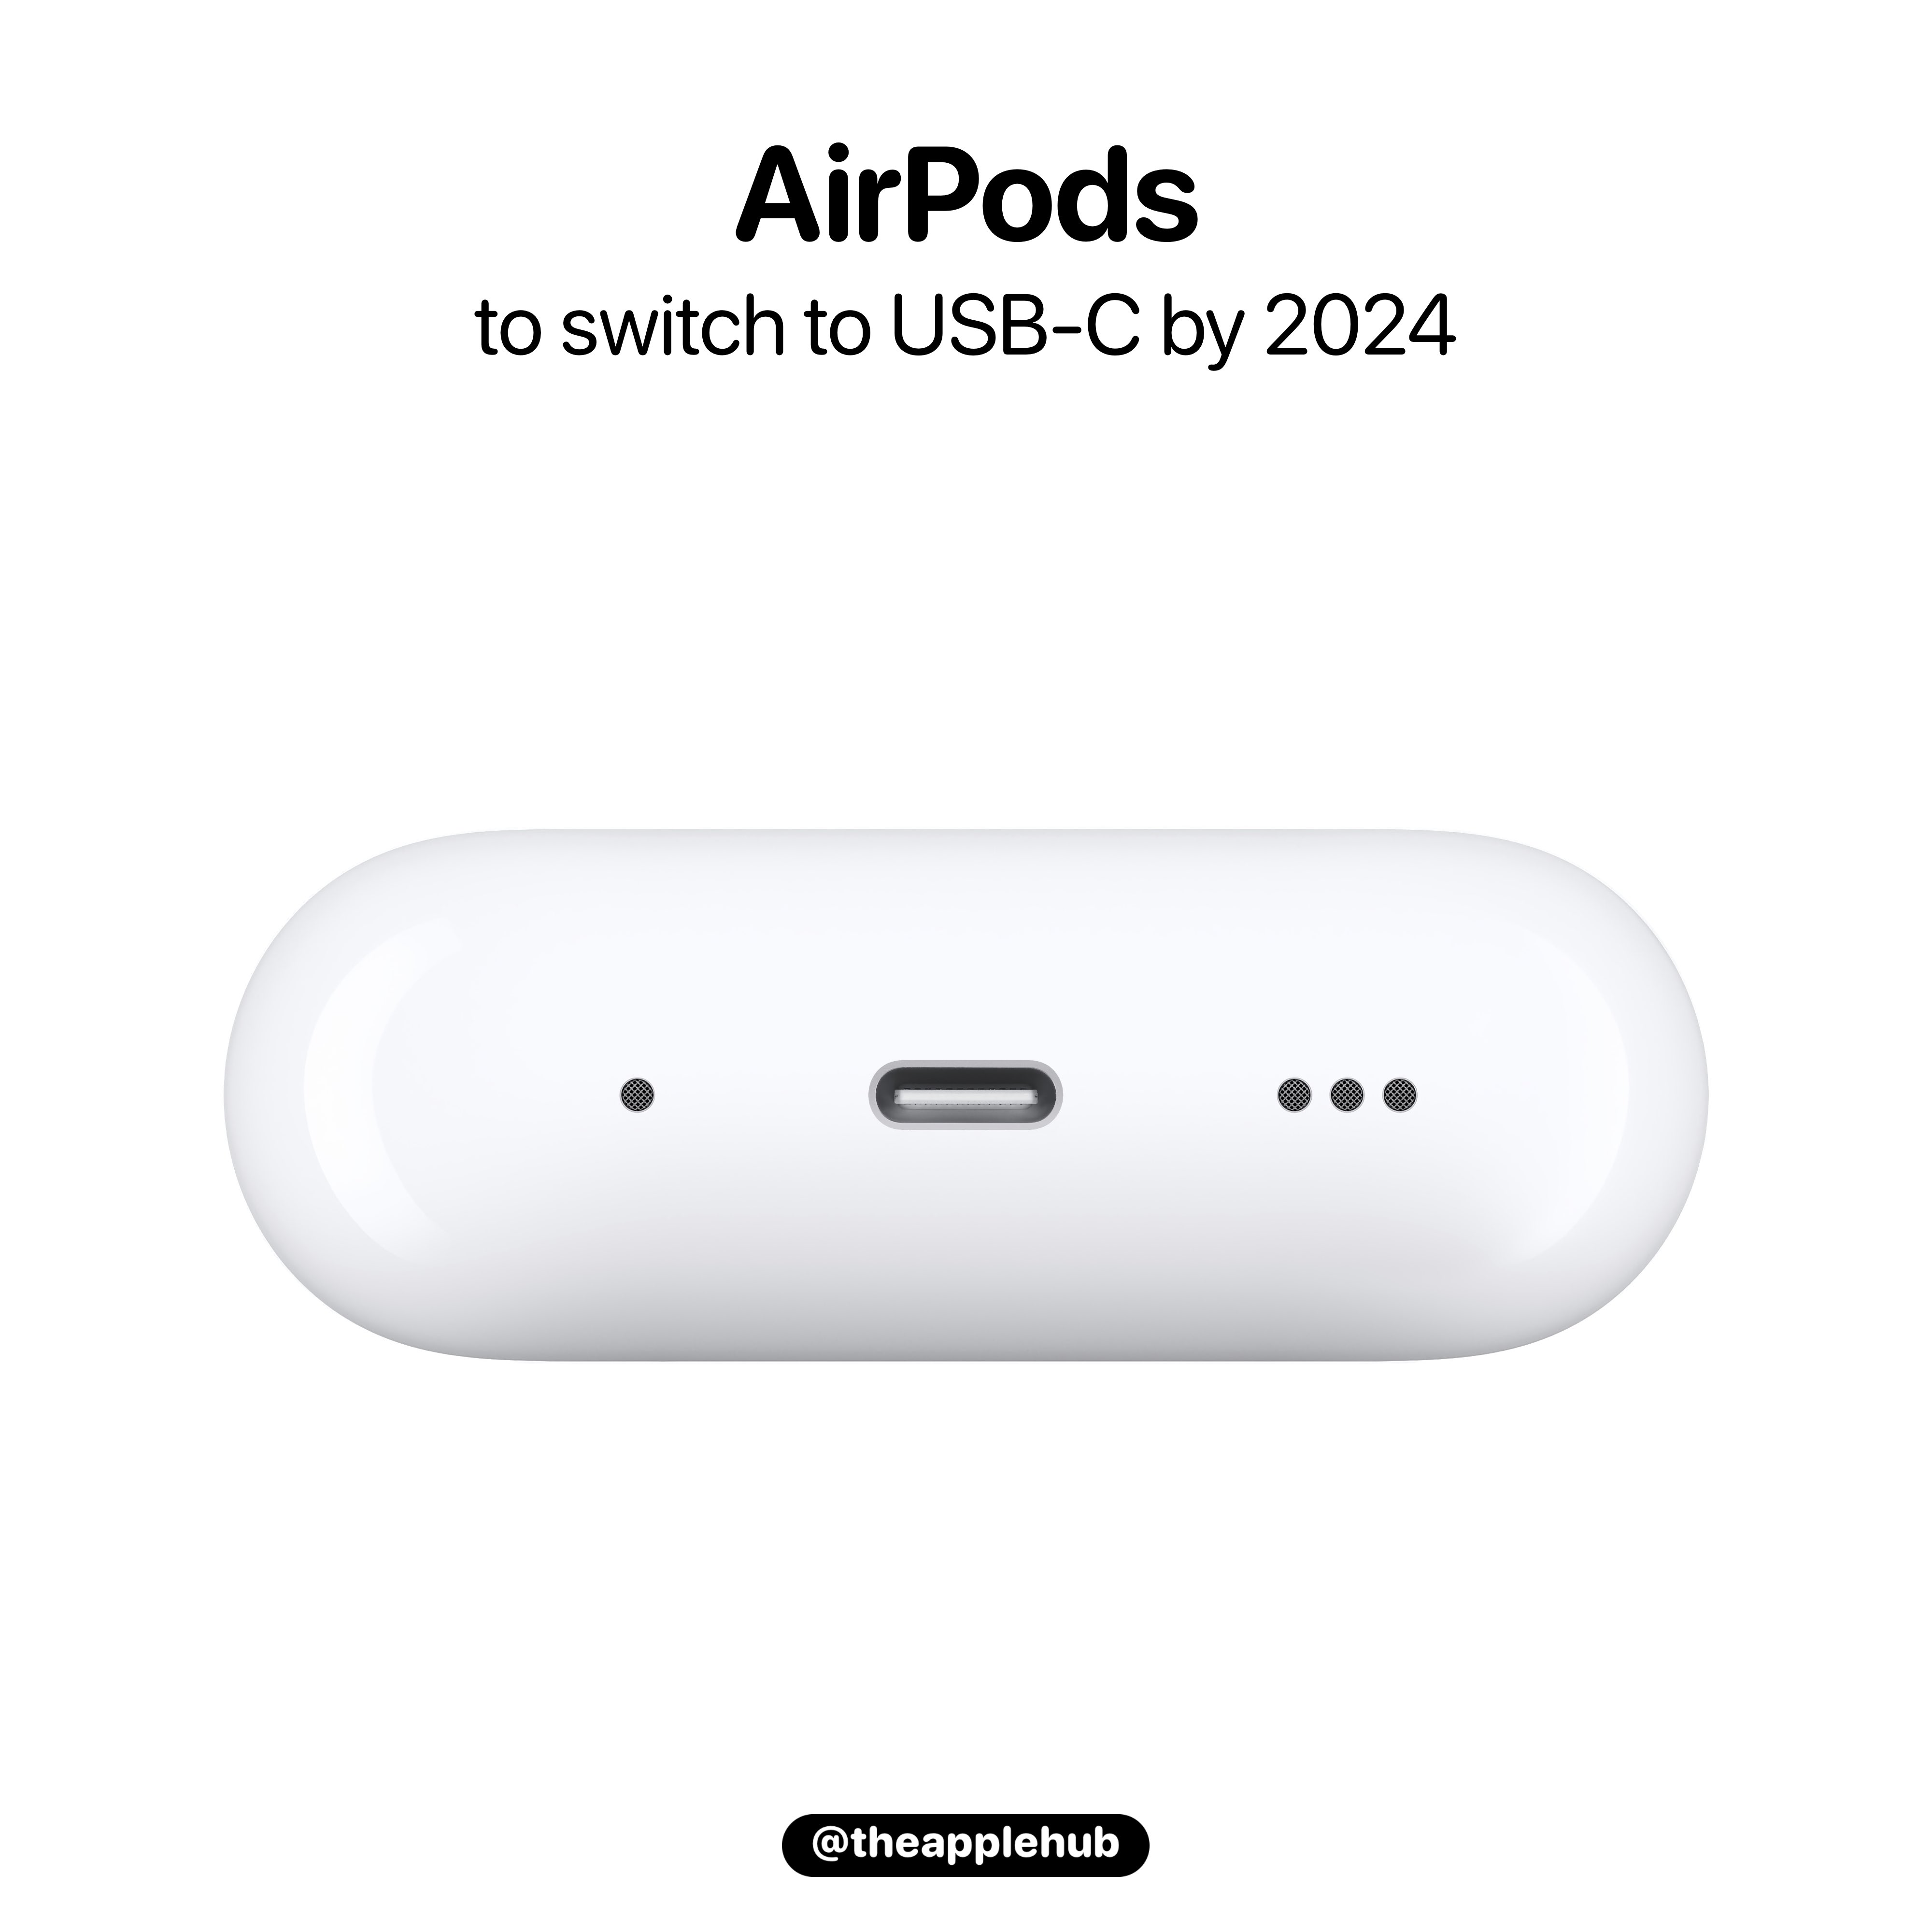 Apple Hub on X: "According to Mark Gurman, all AirPods models and Mac  accessories will transition to USB-C by 2024. This is due to the new EU law  that will require all